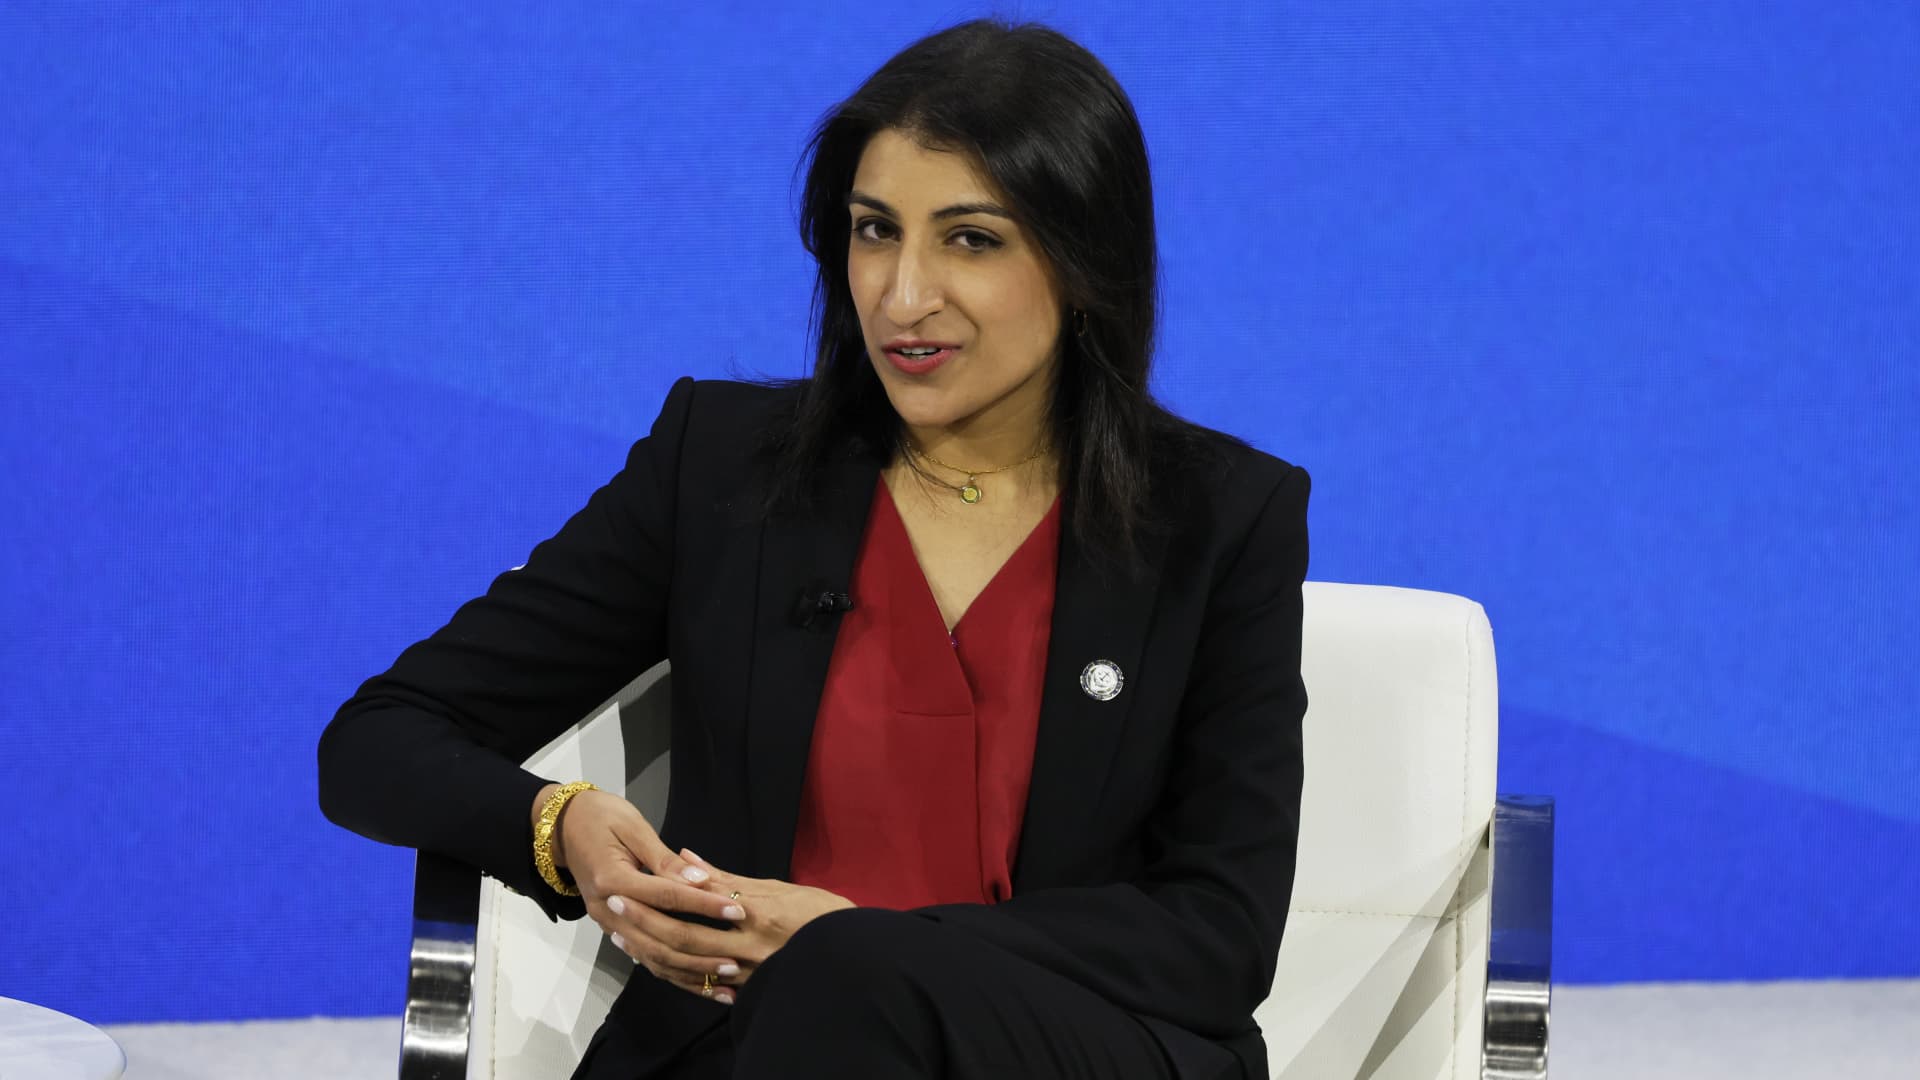 FTC Chair Lina Khan defends her track record when it comes to blocking mergers and doesn't subscribe to Amazon Prime